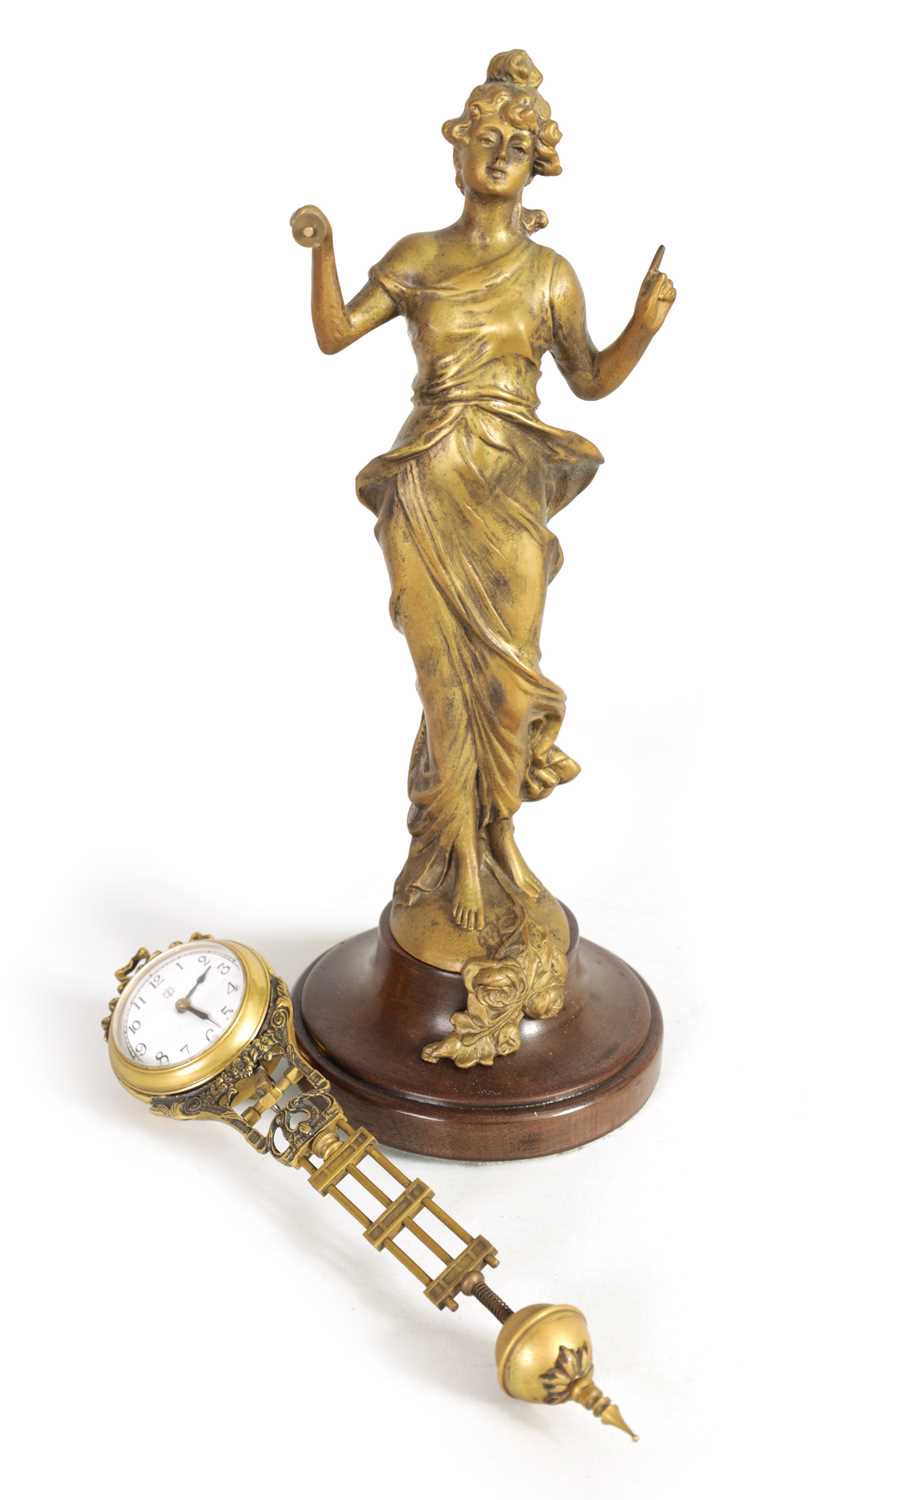 AN EARLY 20TH CENTURY FRENCH MYSTERY FIGURAL MANTLE CLOCK